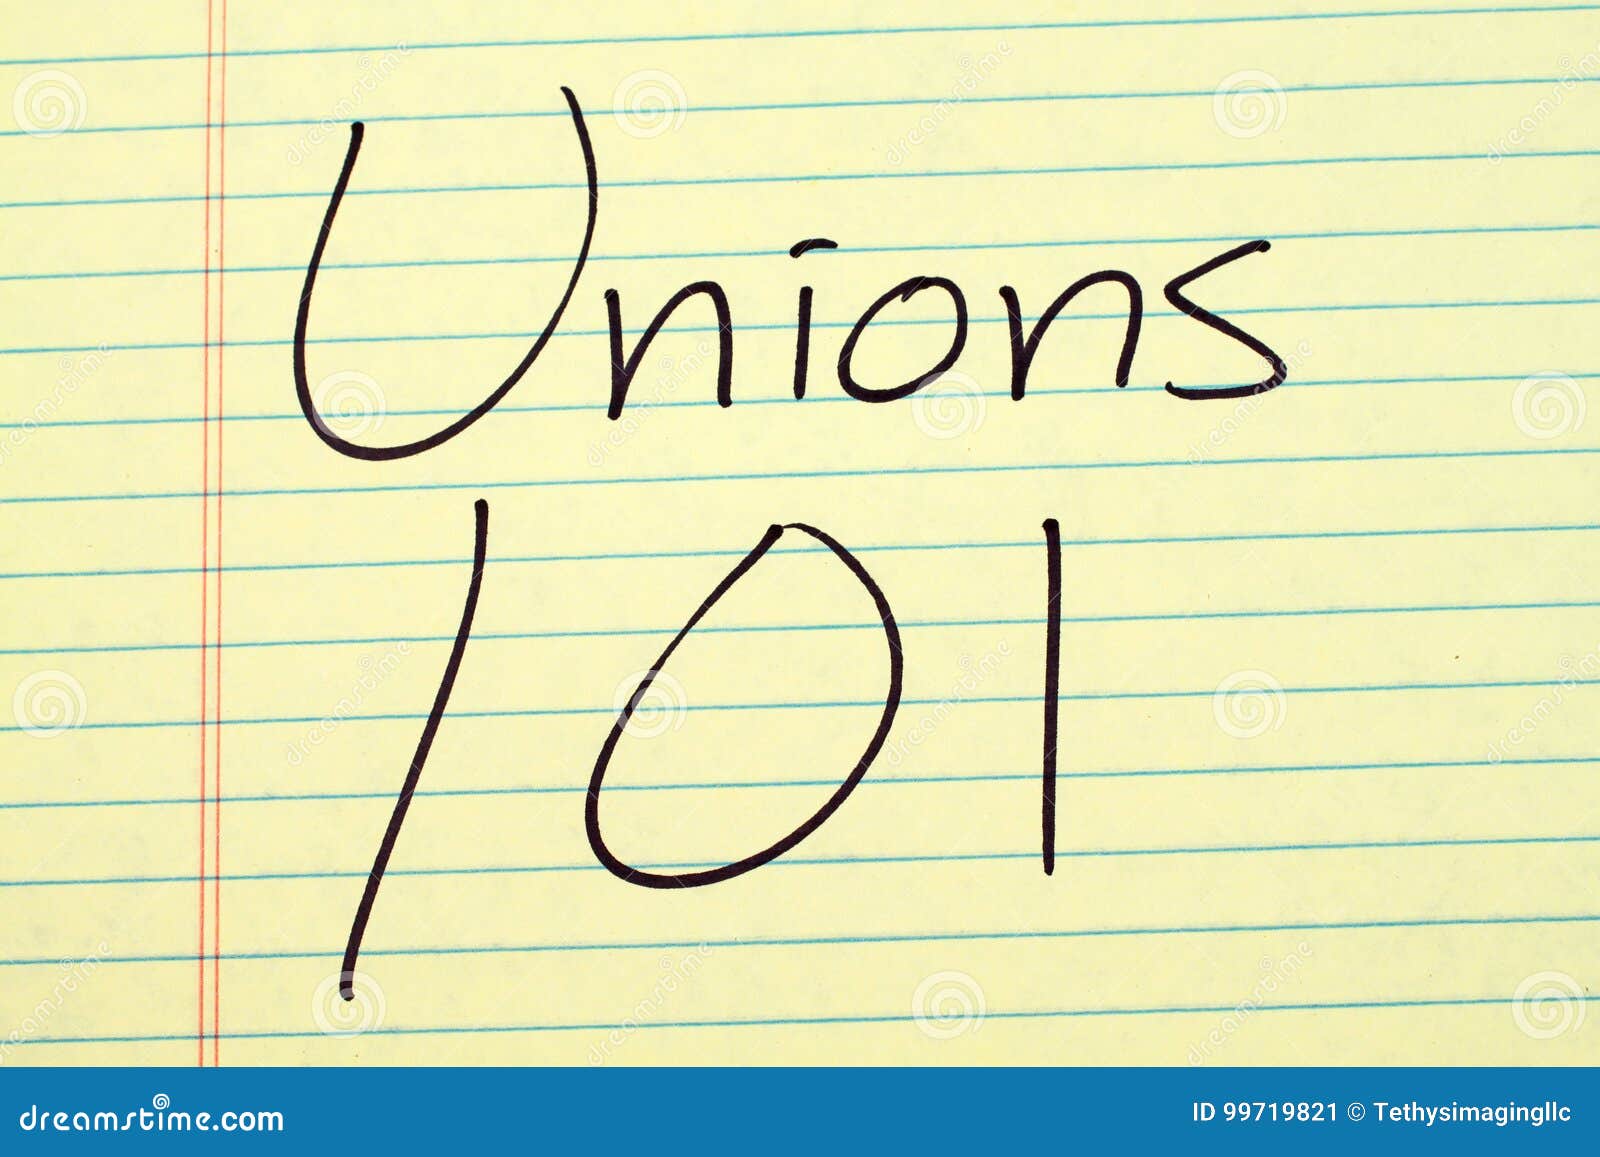 unions 101 on a yellow legal pad